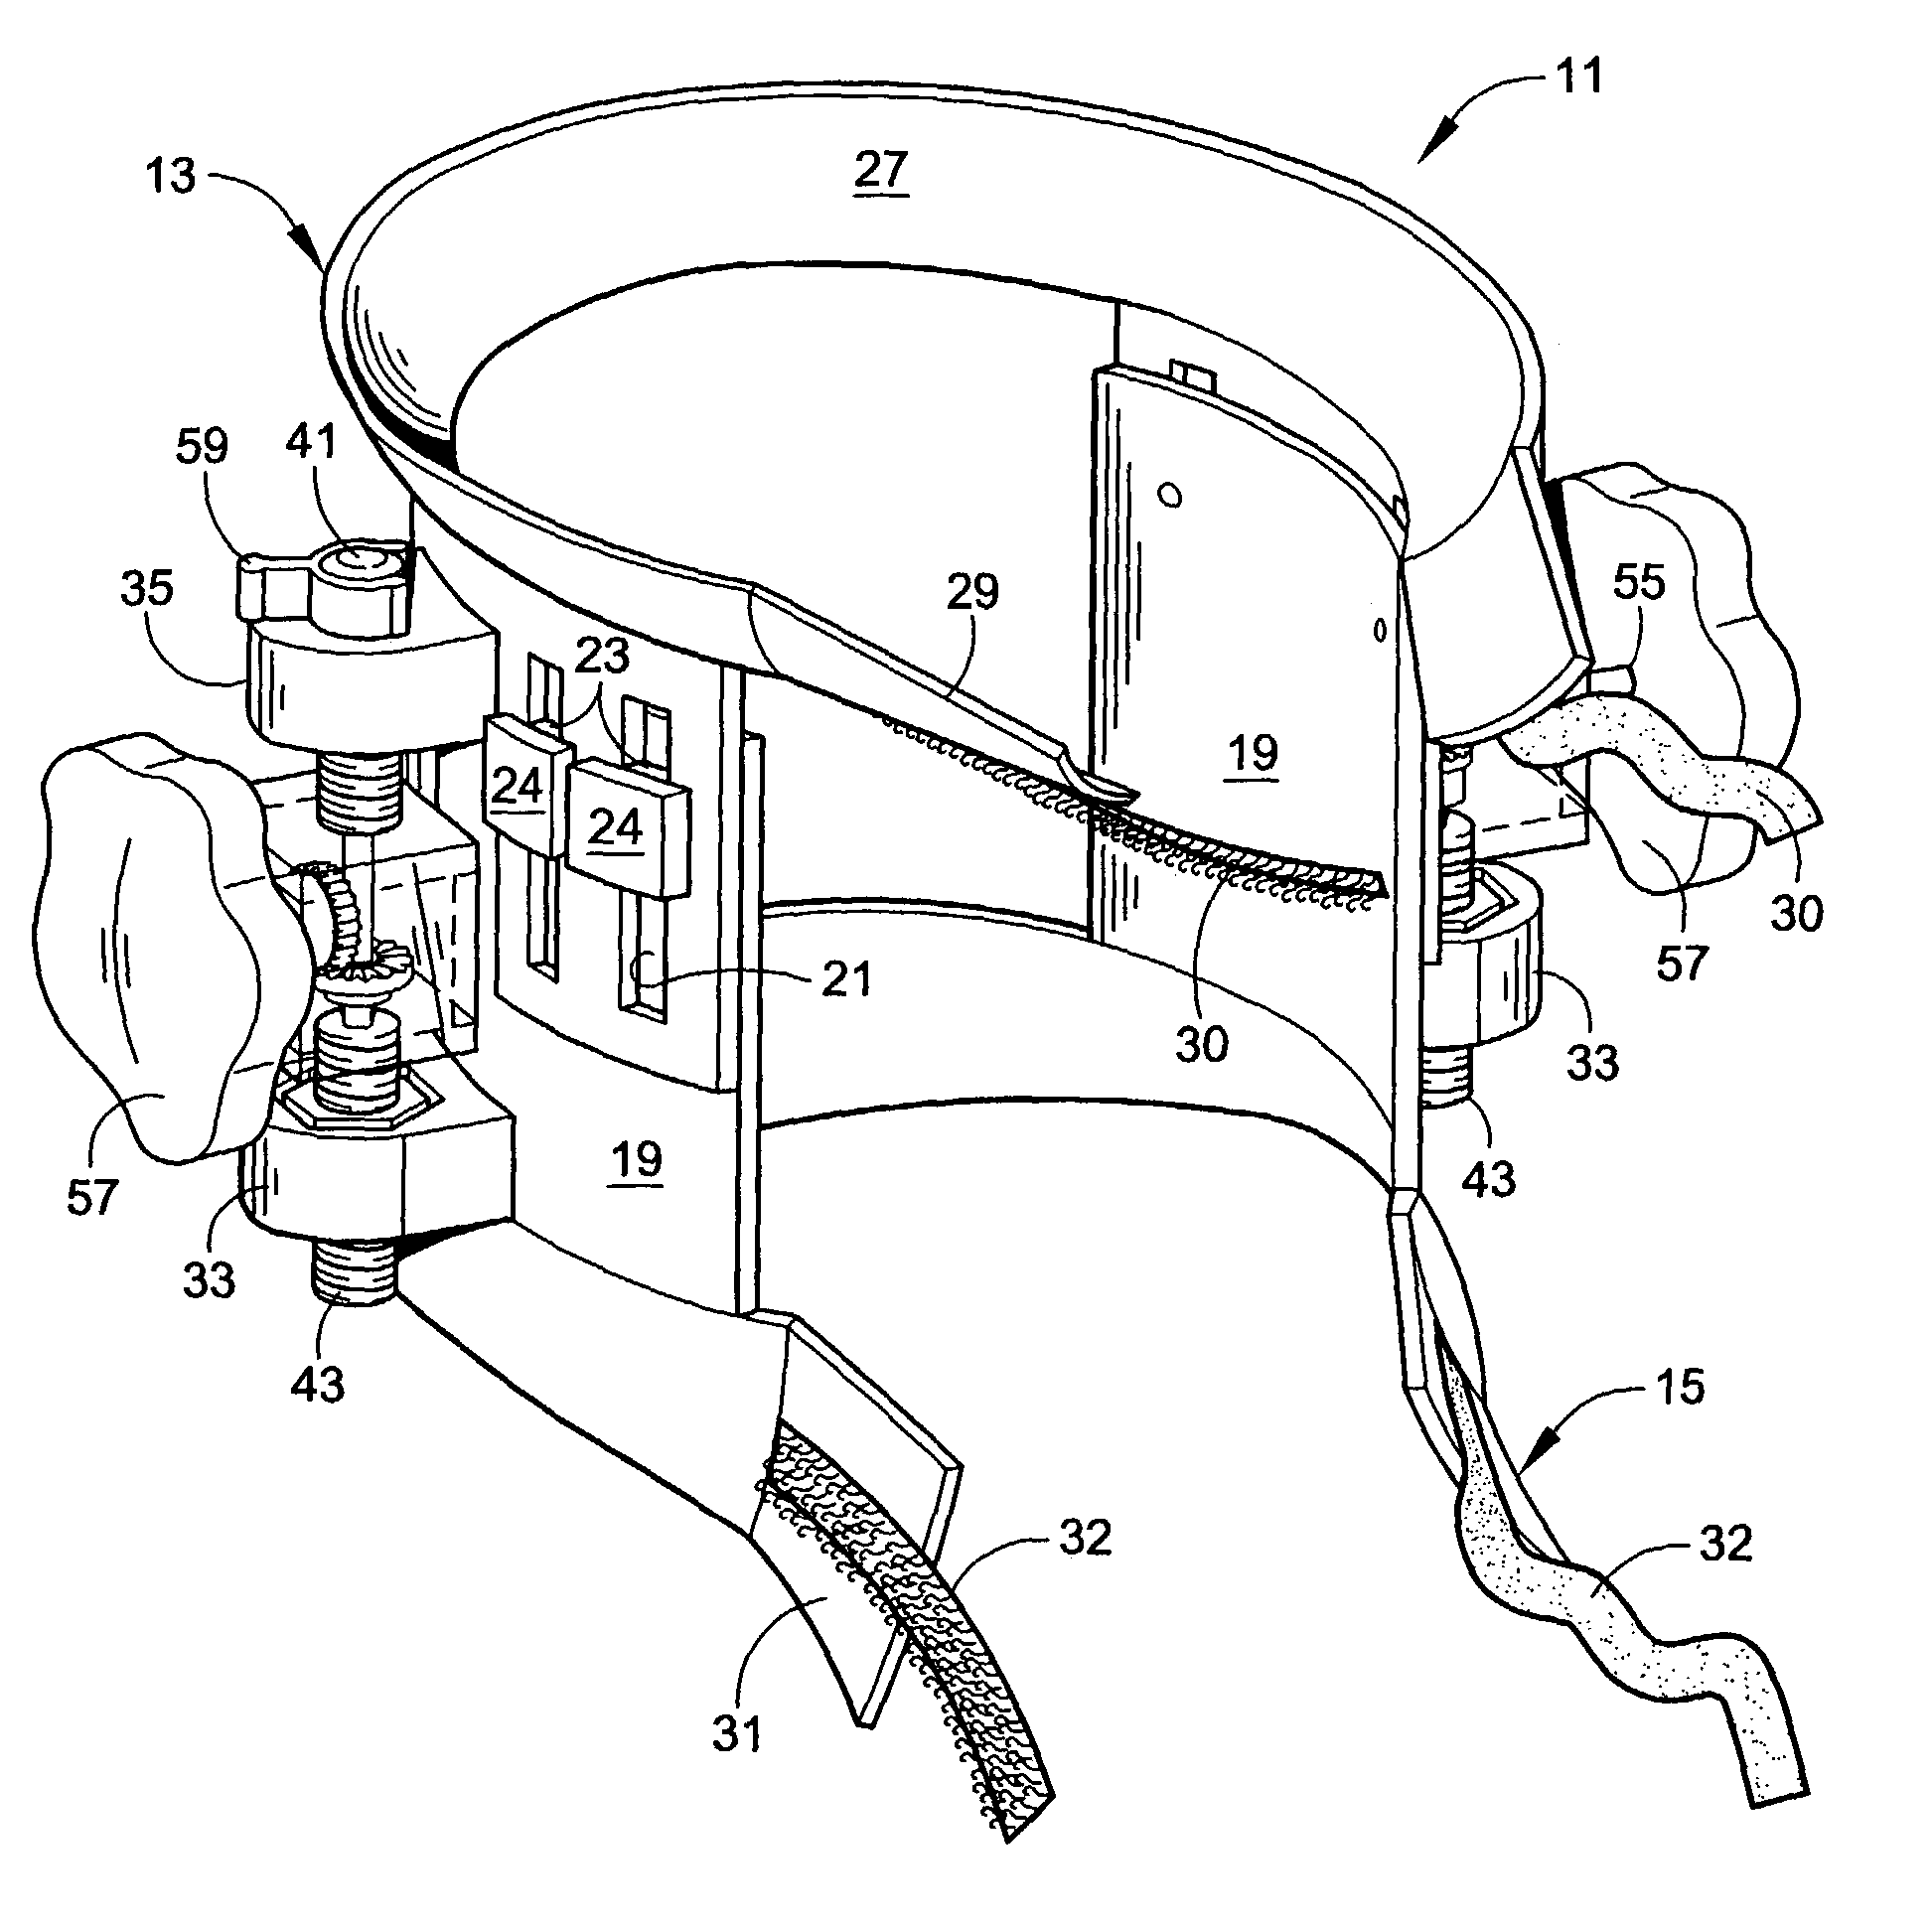 Cervical spine brace and traction device